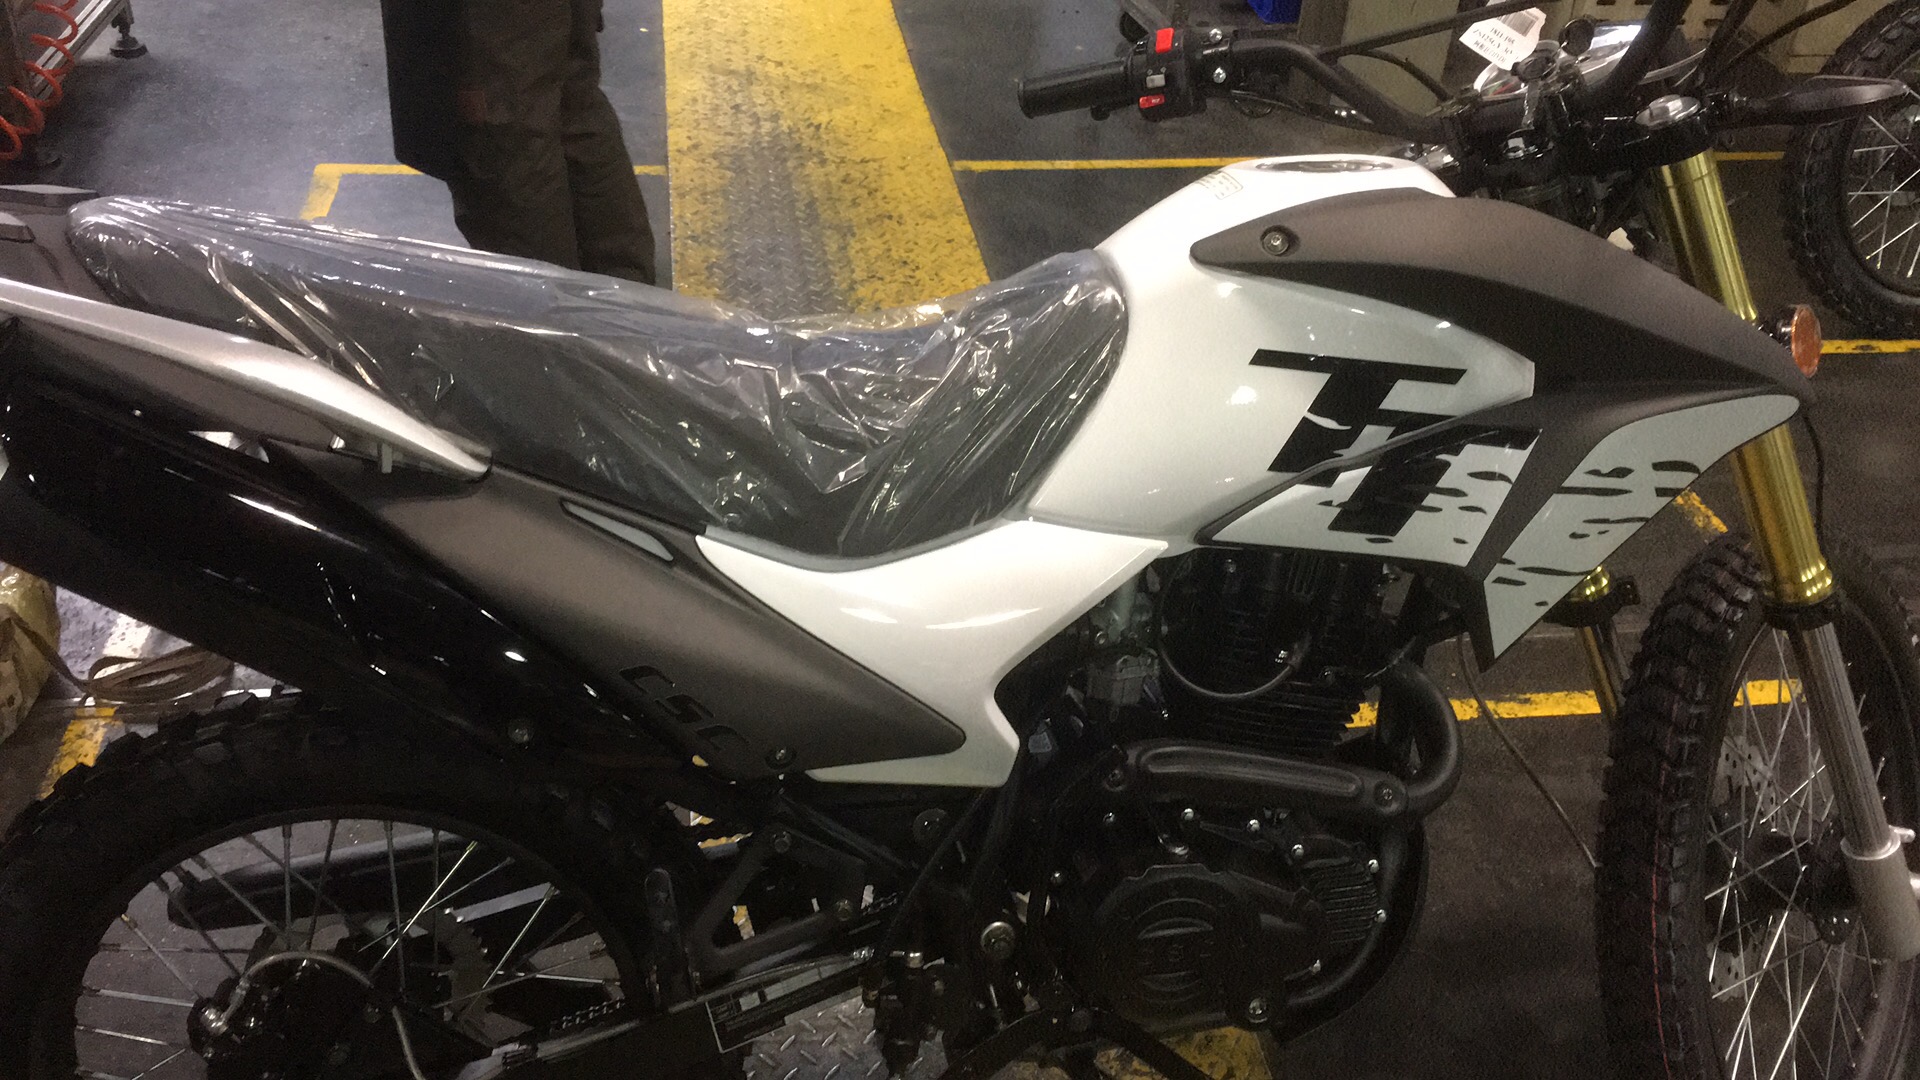 The 2019 TT250 in White with Black graphics.